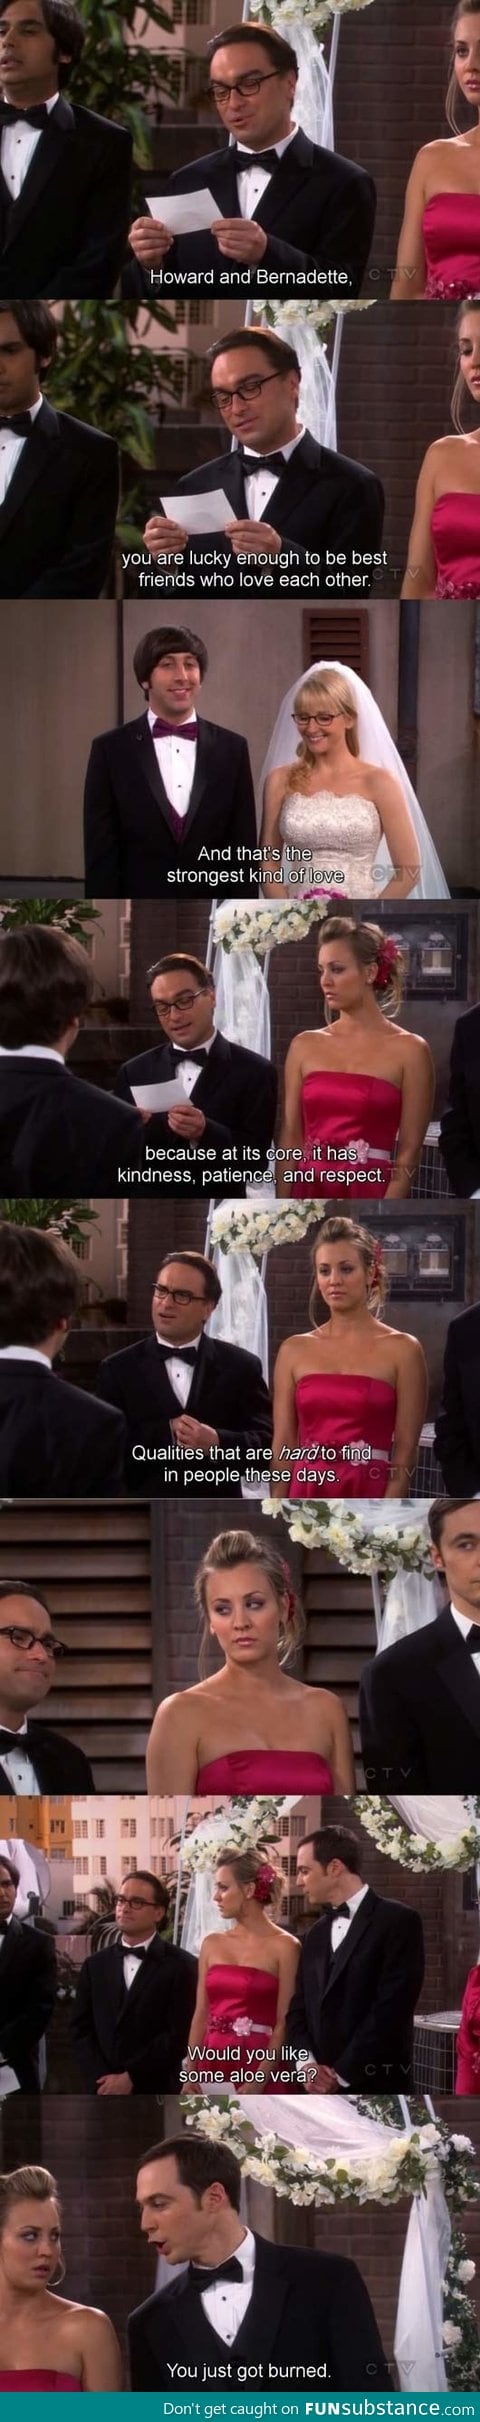 Probably the best moment on the Big Bang Theory